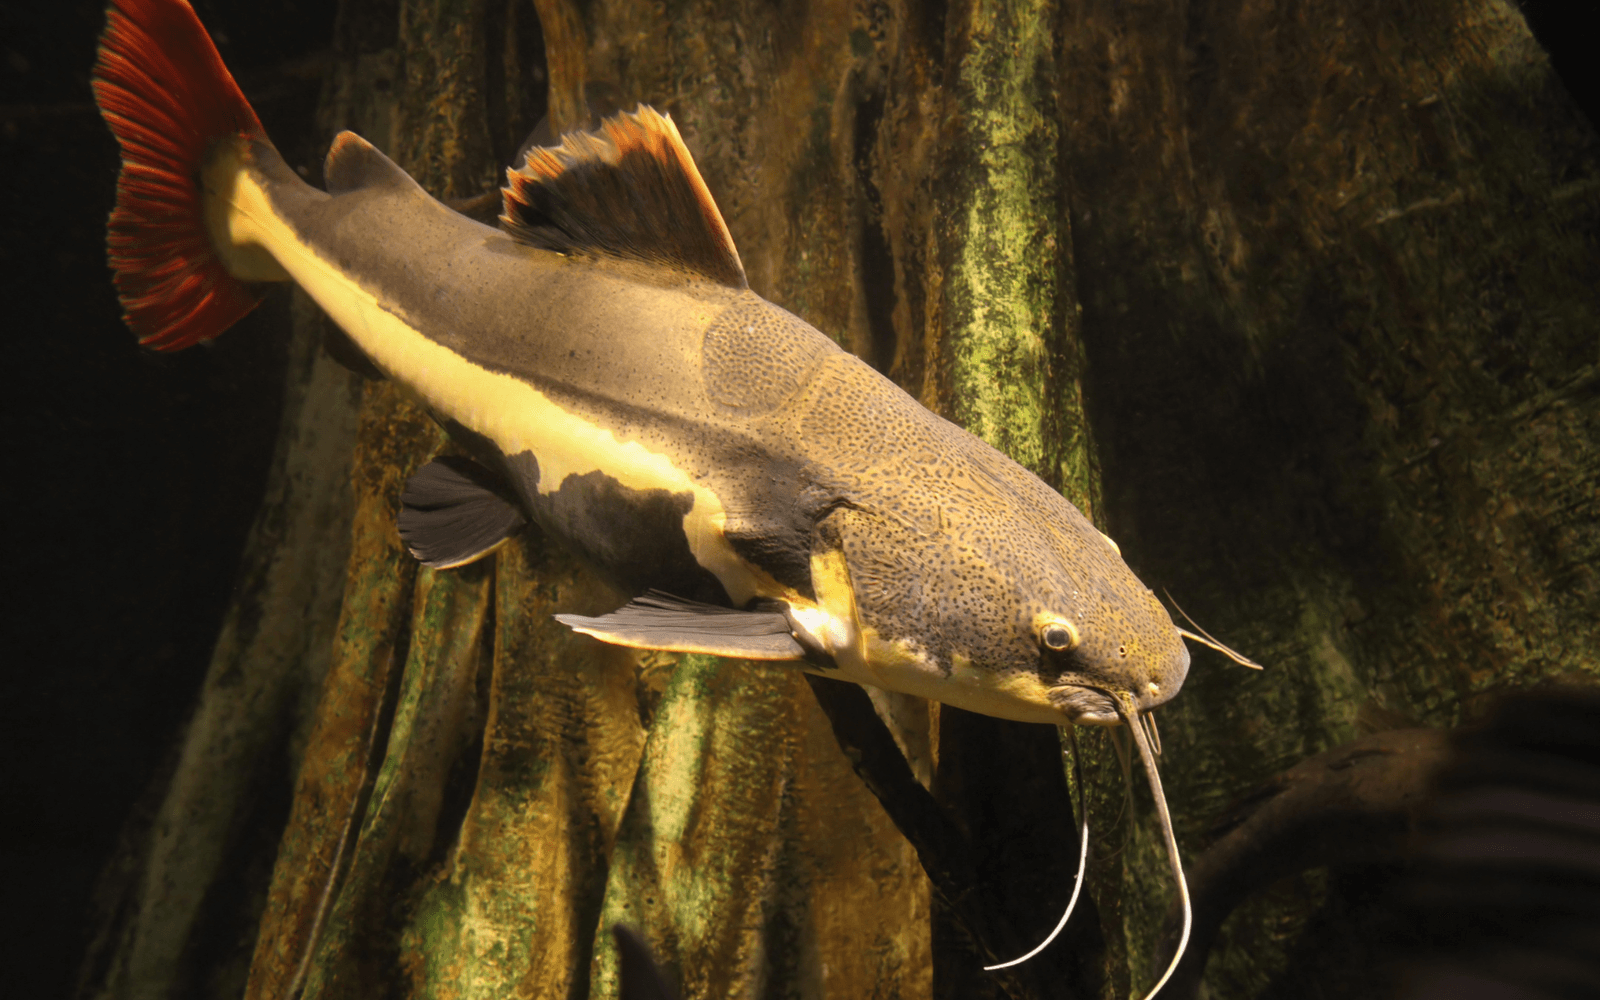 Large red tailed catfish